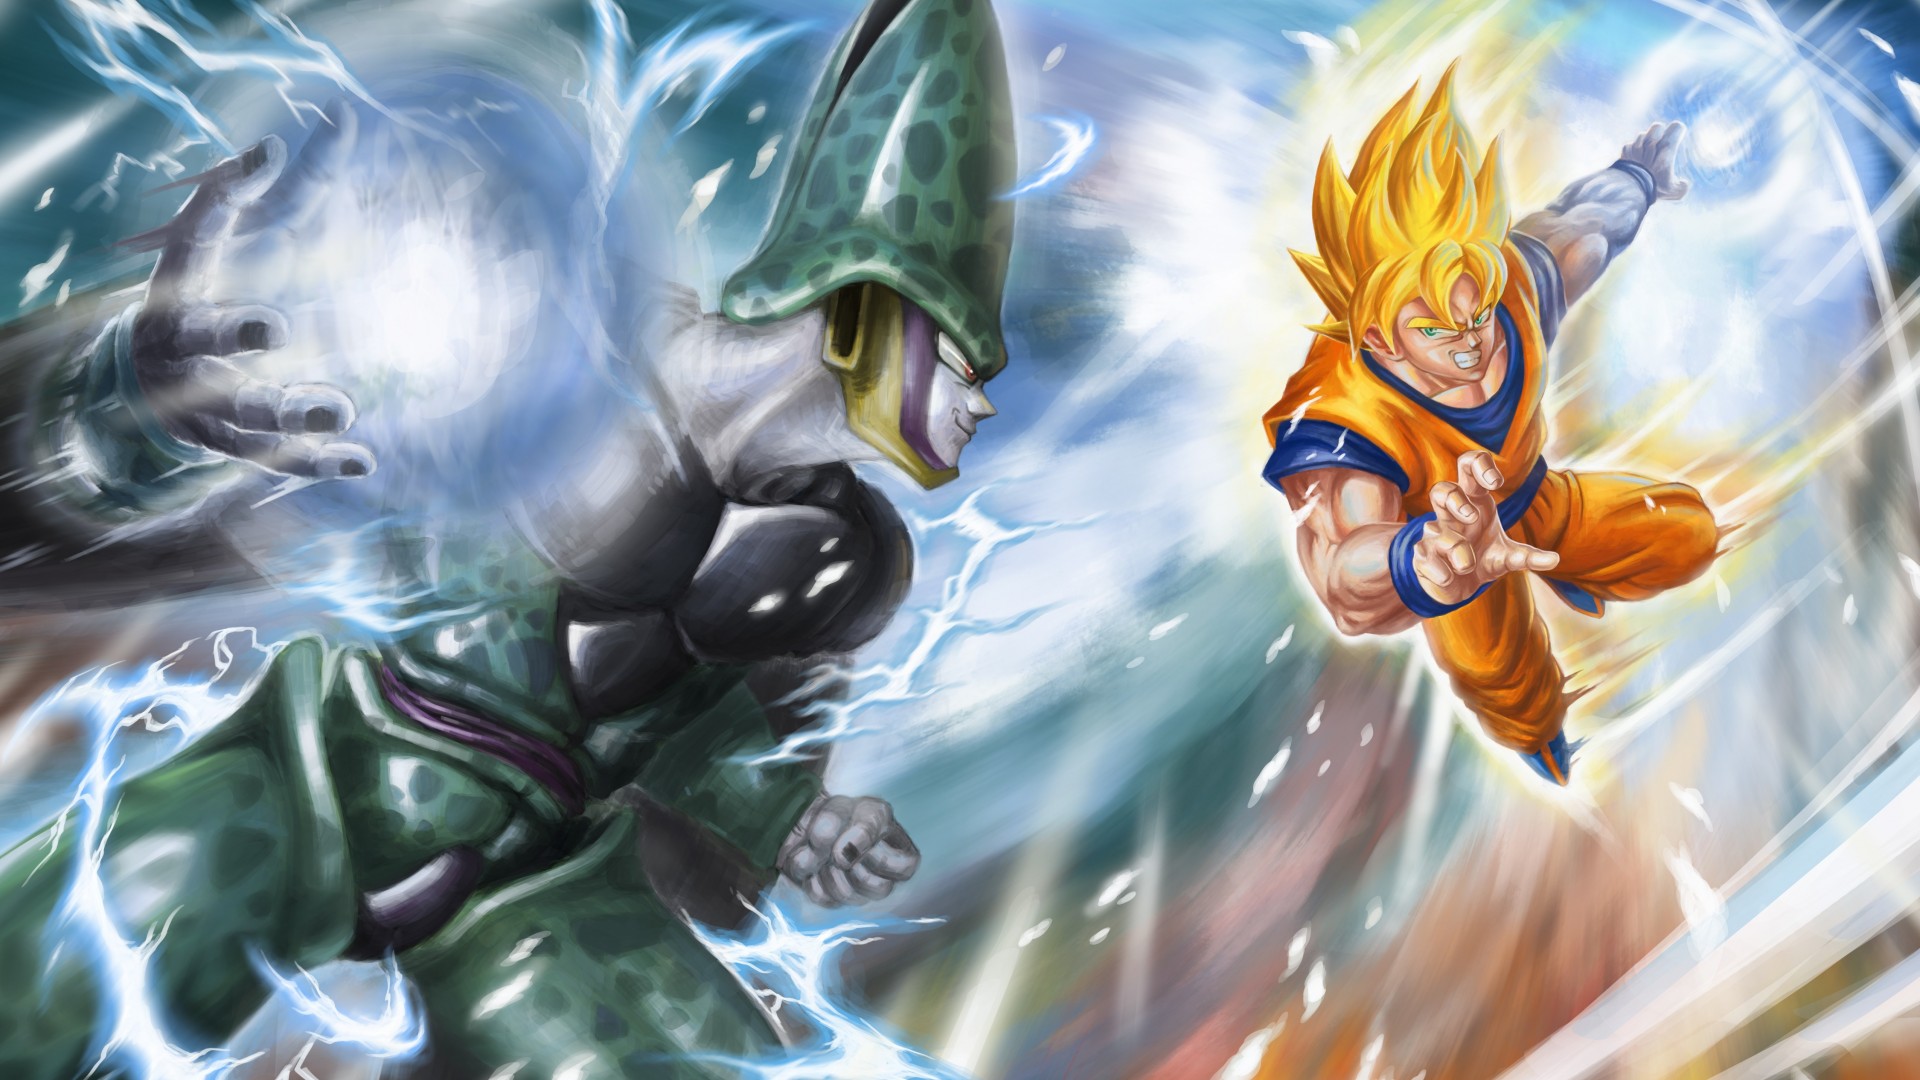 Dragon Ball Z Wallpaper for PC Full HD Pictures